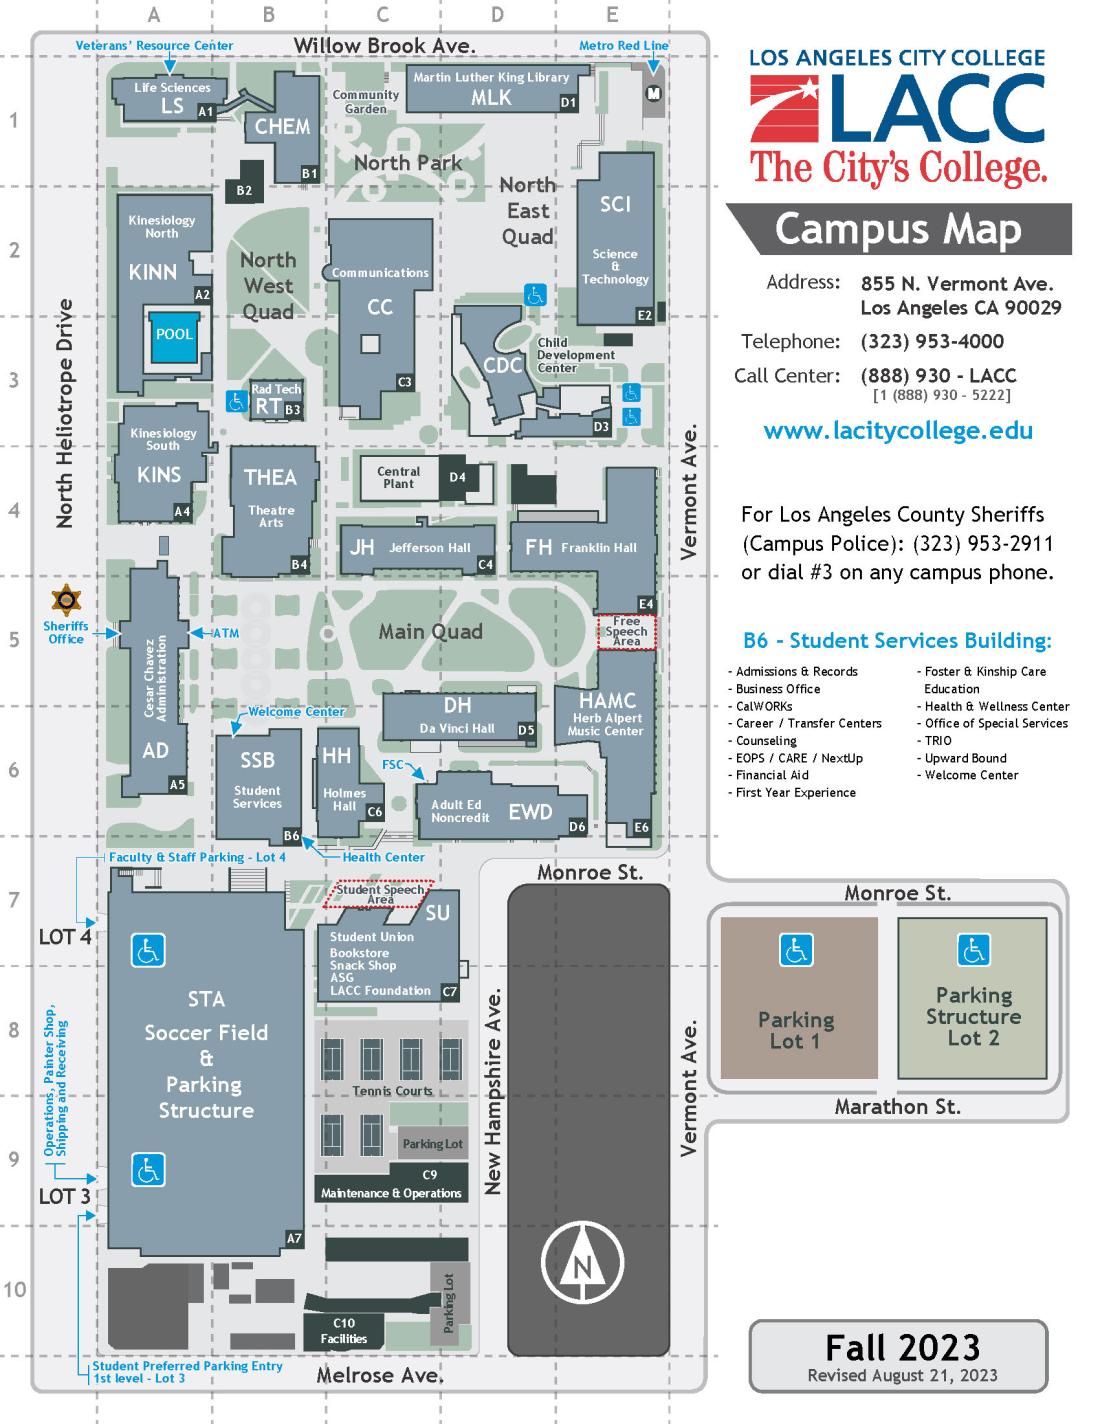 The LACC Campus Map for Fall 2023